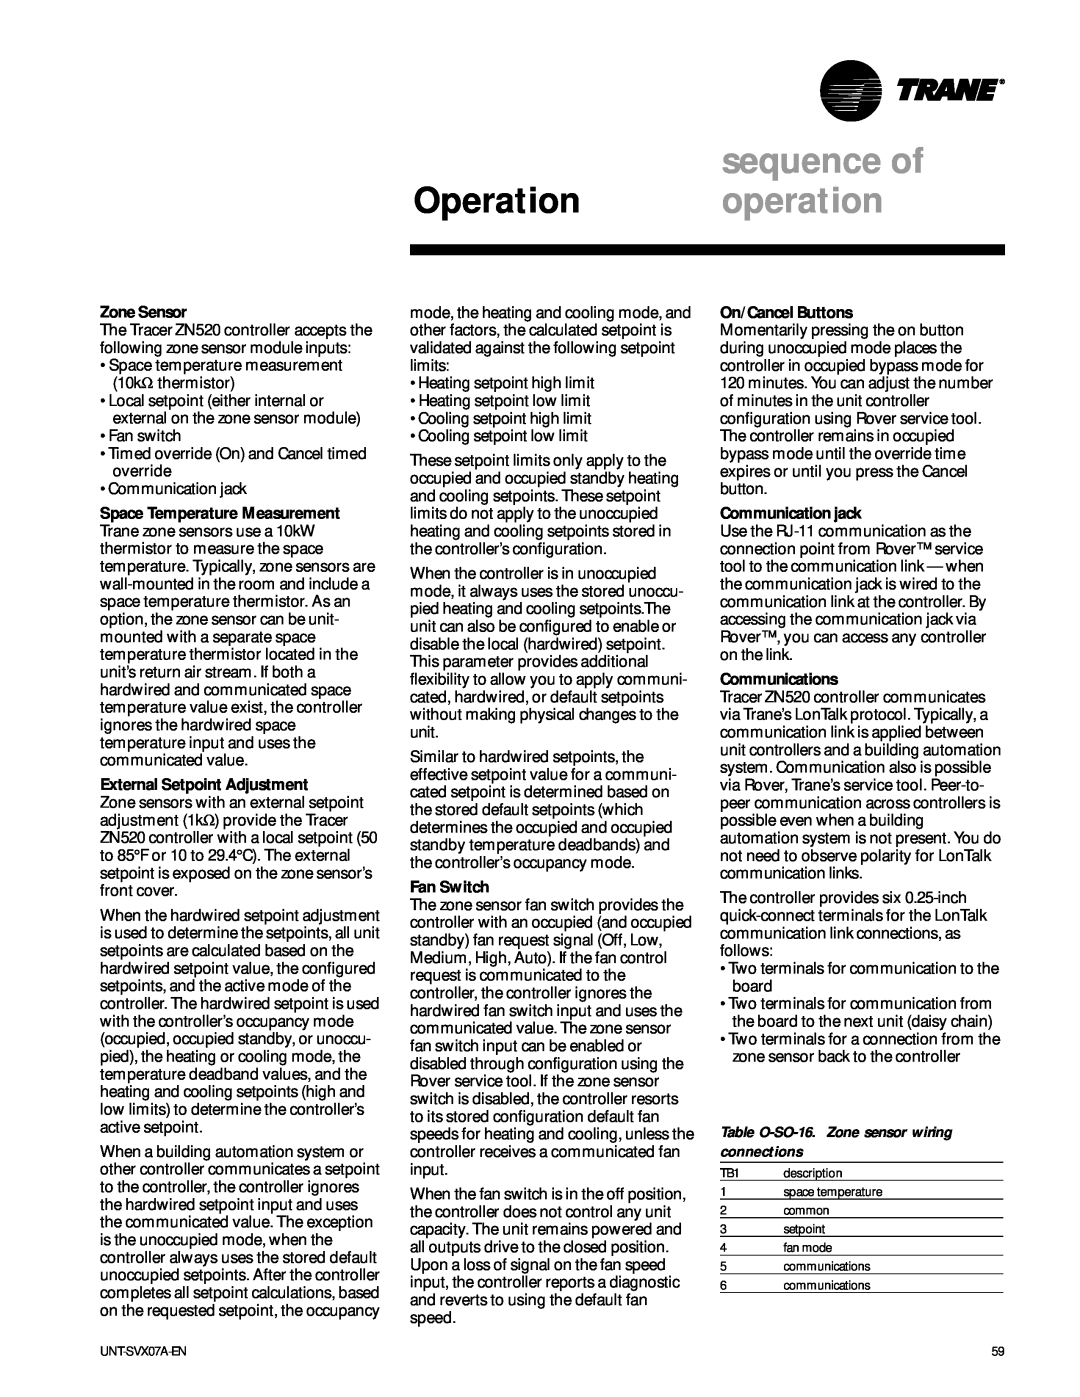 Trane UniTrane Fan-Coil & Force Flo Air Conditioners manual sequence of, Operation operation, Zone Sensor, Fan Switch 